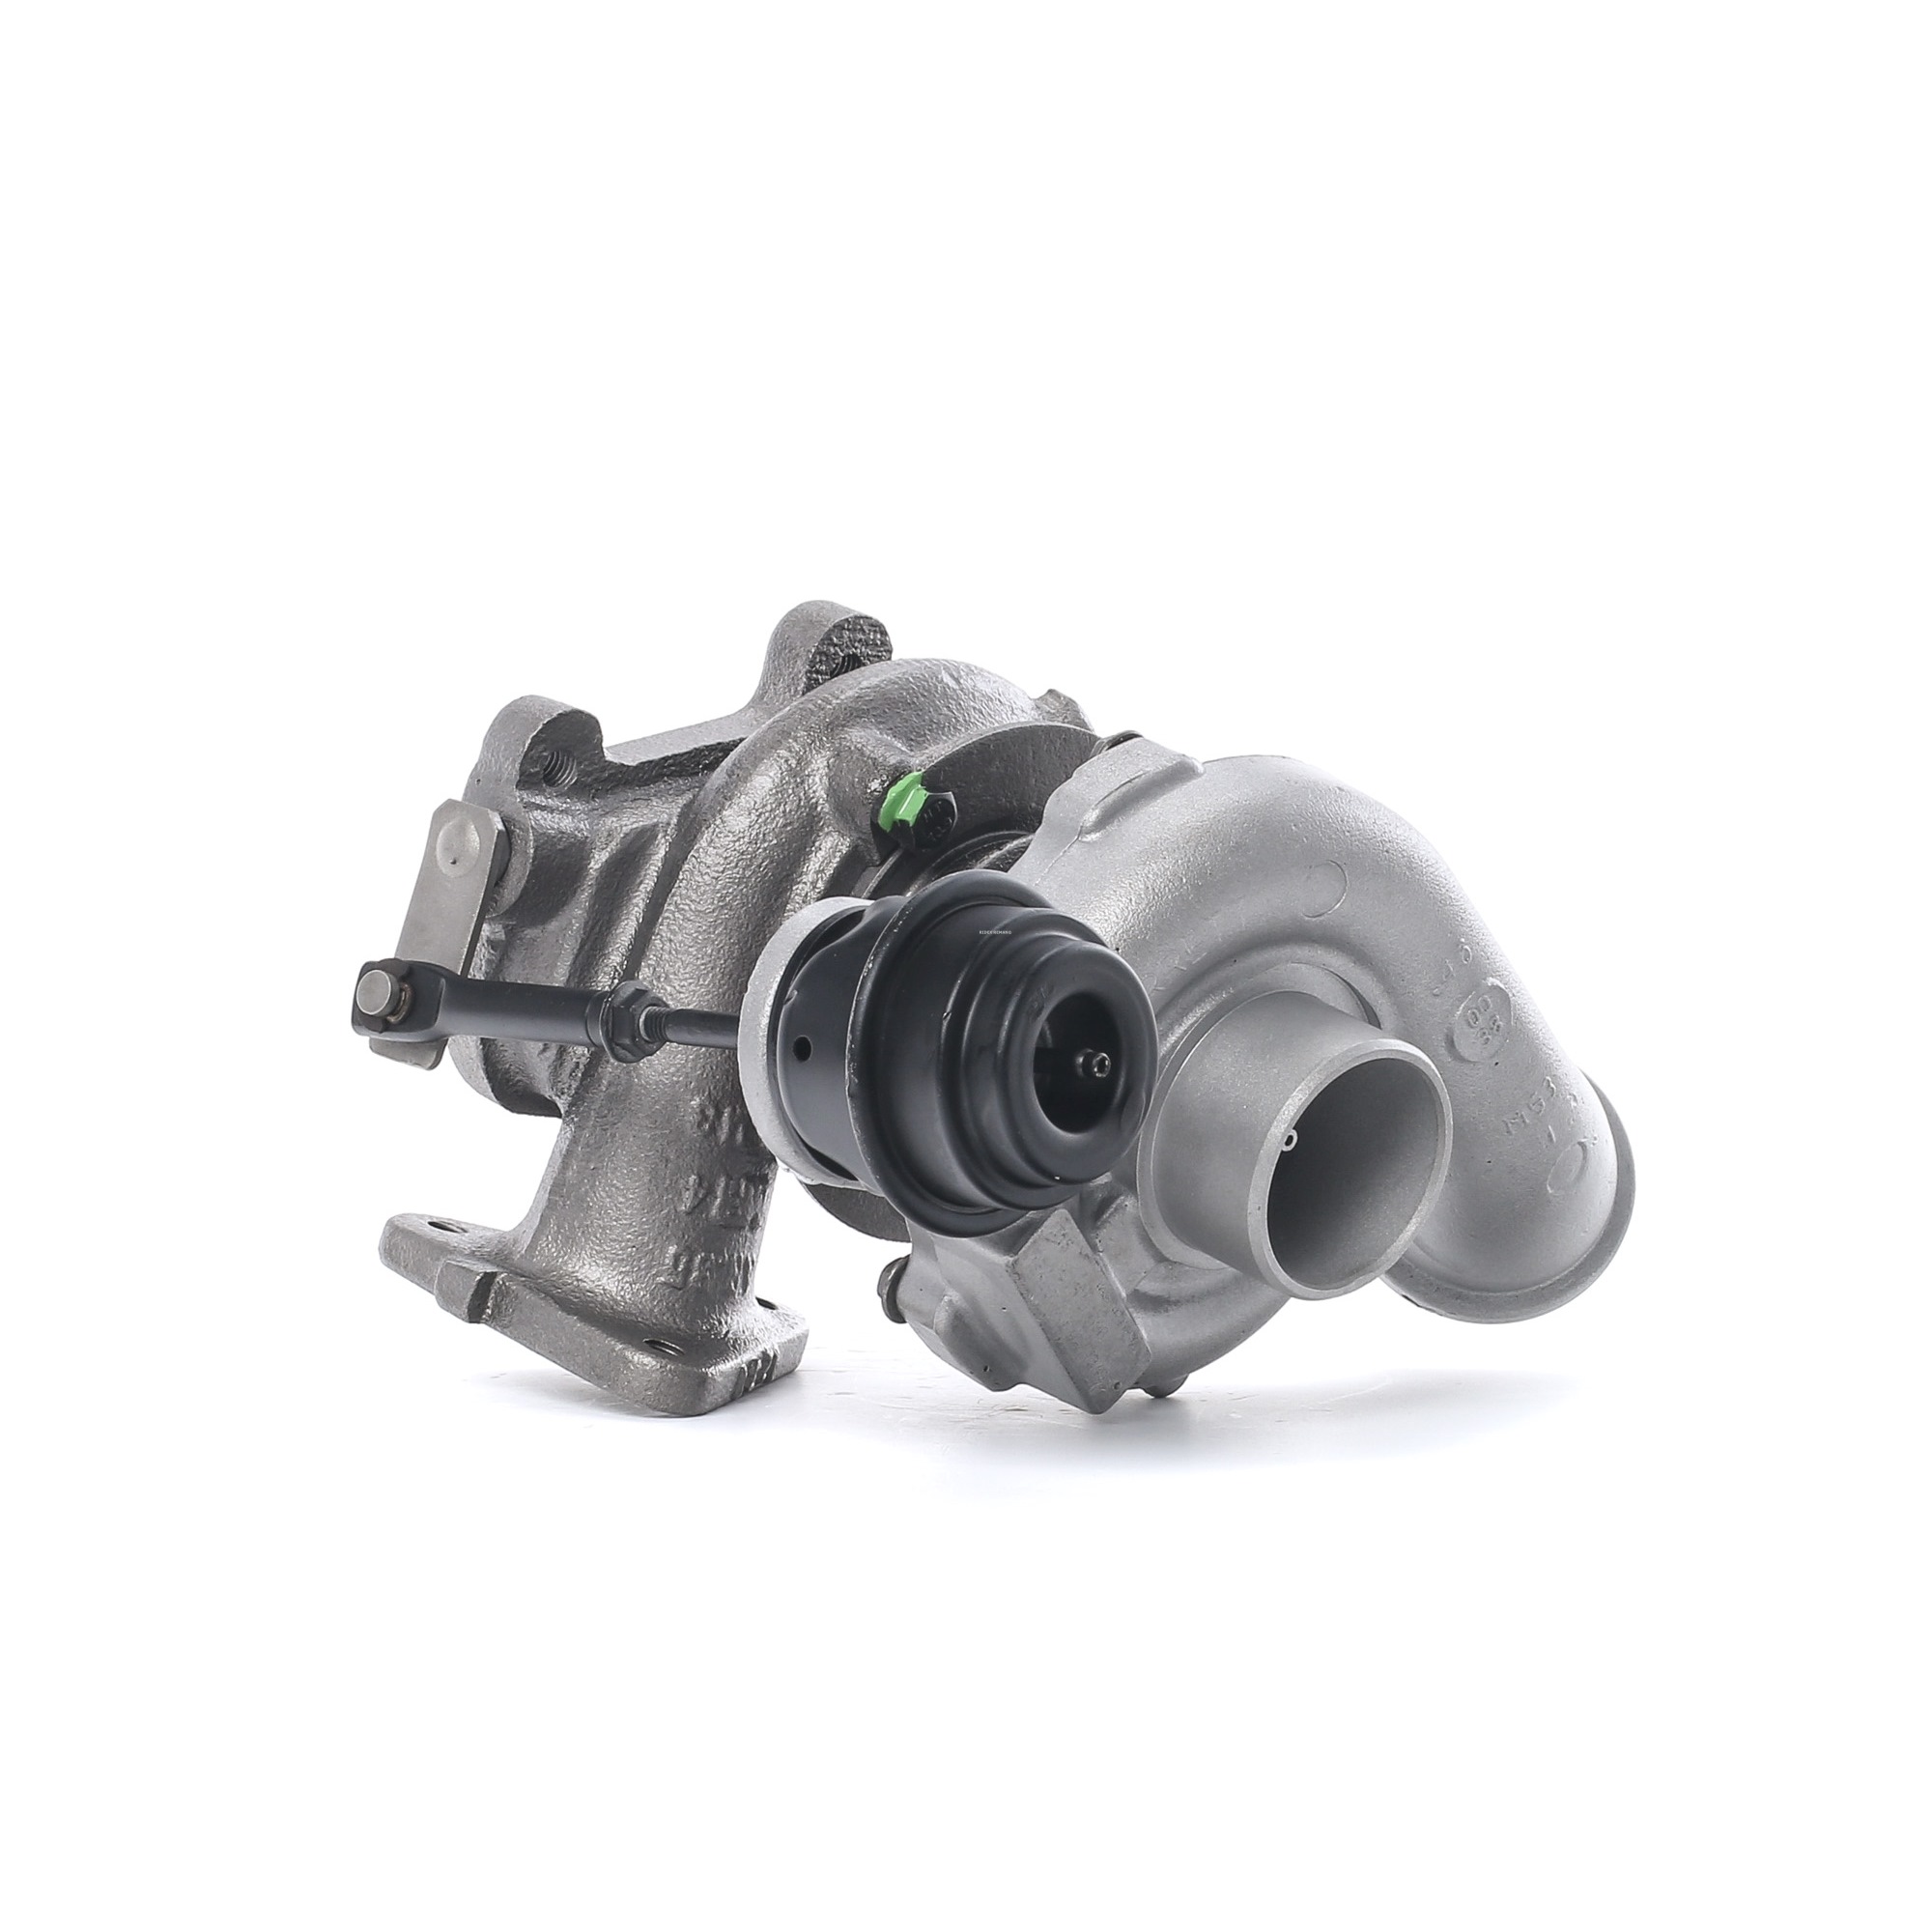 RIDEX REMAN 2234C10016R Turbocharger Exhaust Turbocharger, with wastegate boost regulation, Euro 2, Pneumatic, without attachment material